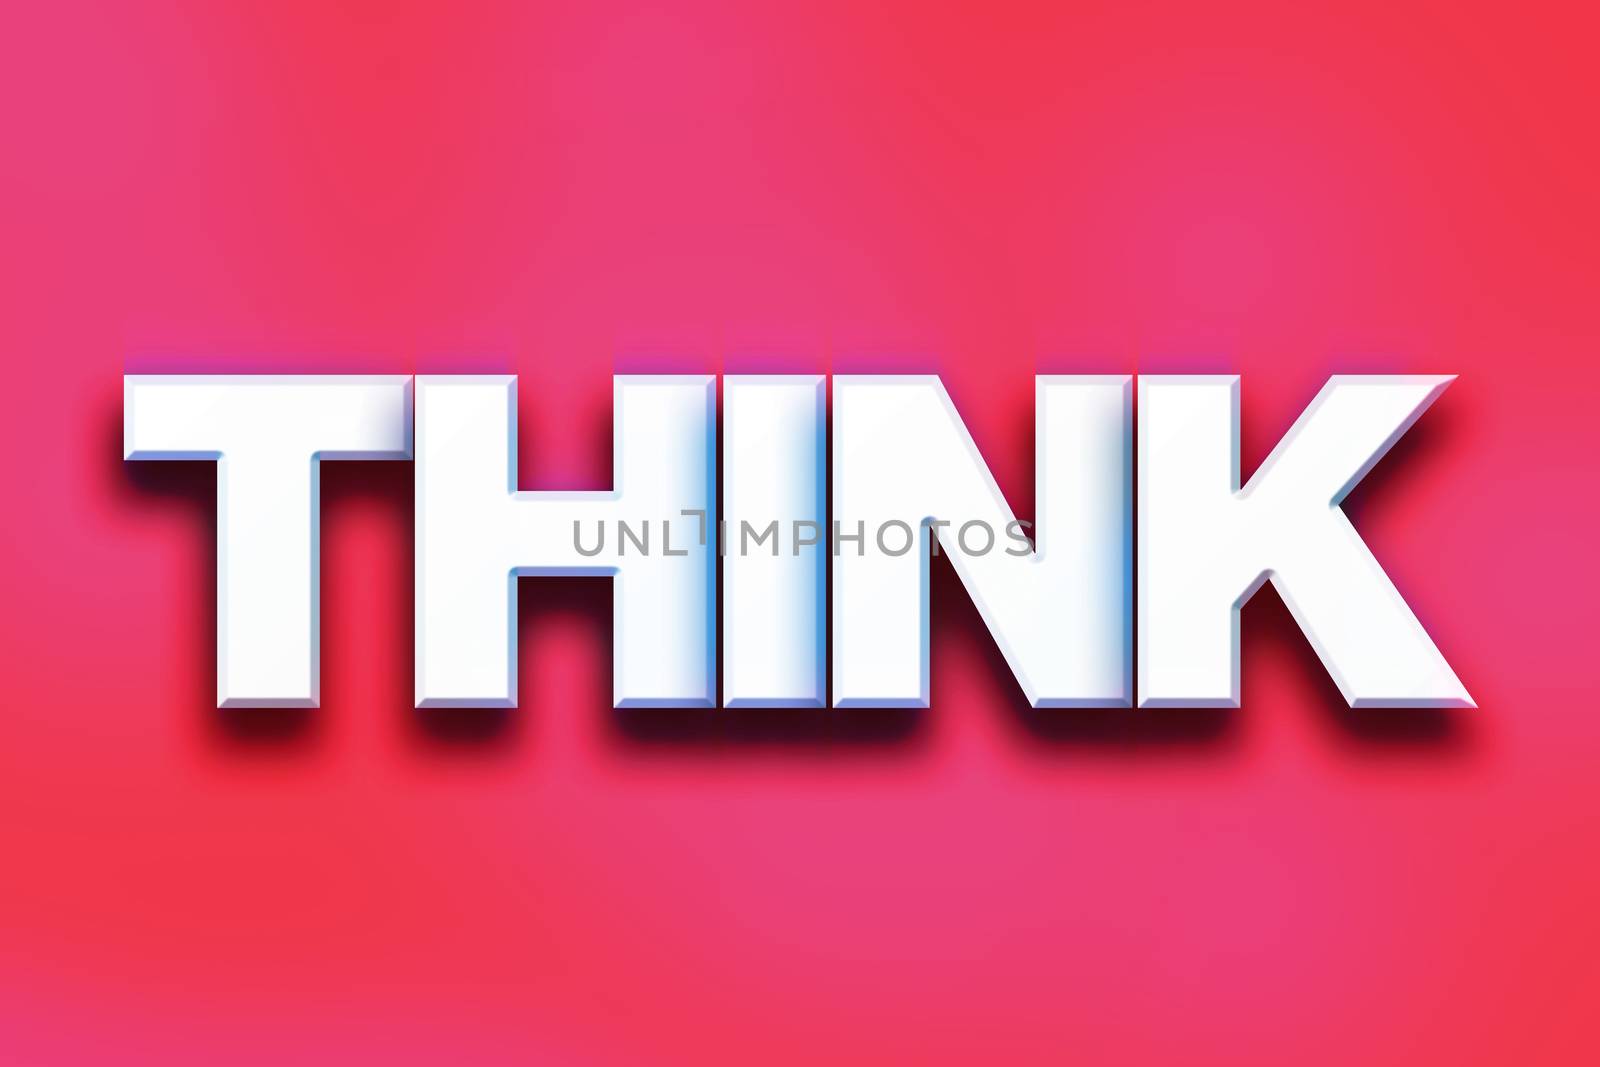 The word "Think" written in white 3D letters on a colorful background concept and theme.